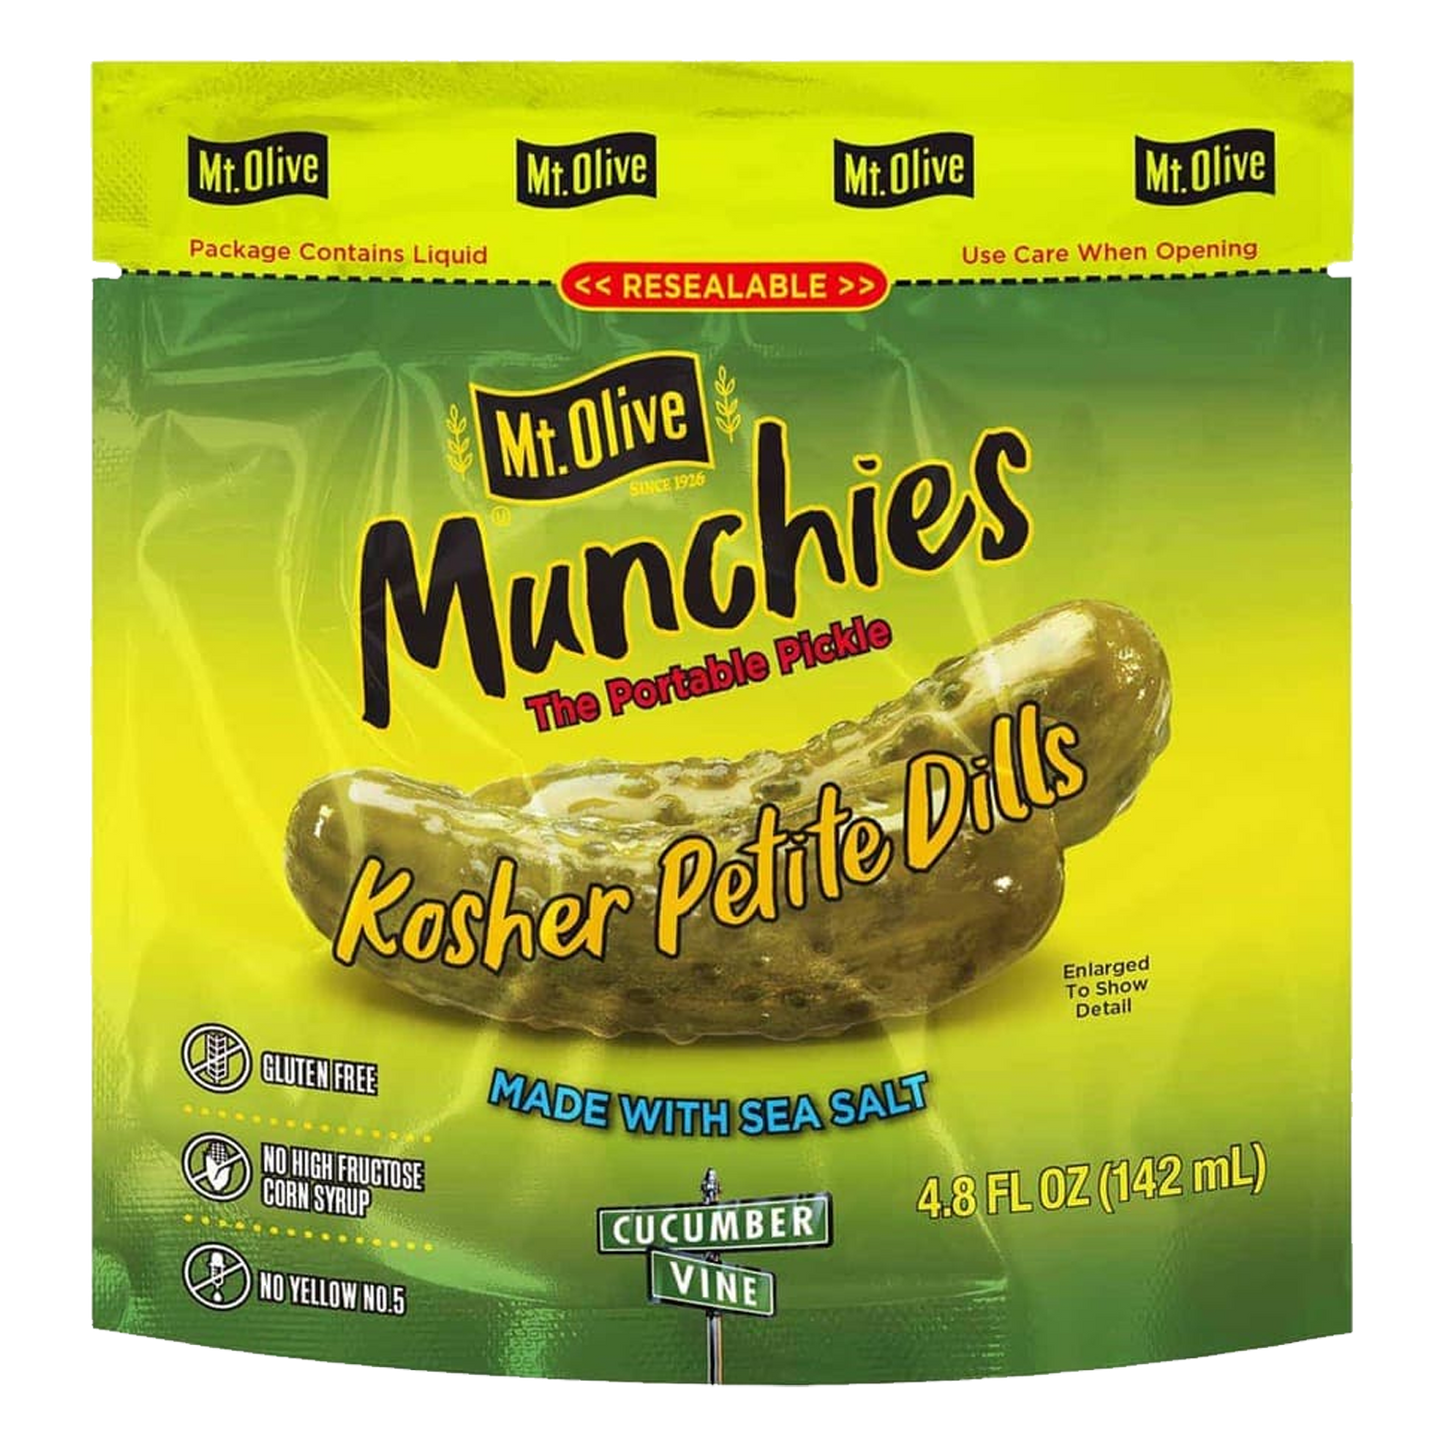 Mt. Olive Munchies Kosher Petite Dill Chips Pouch 142ml